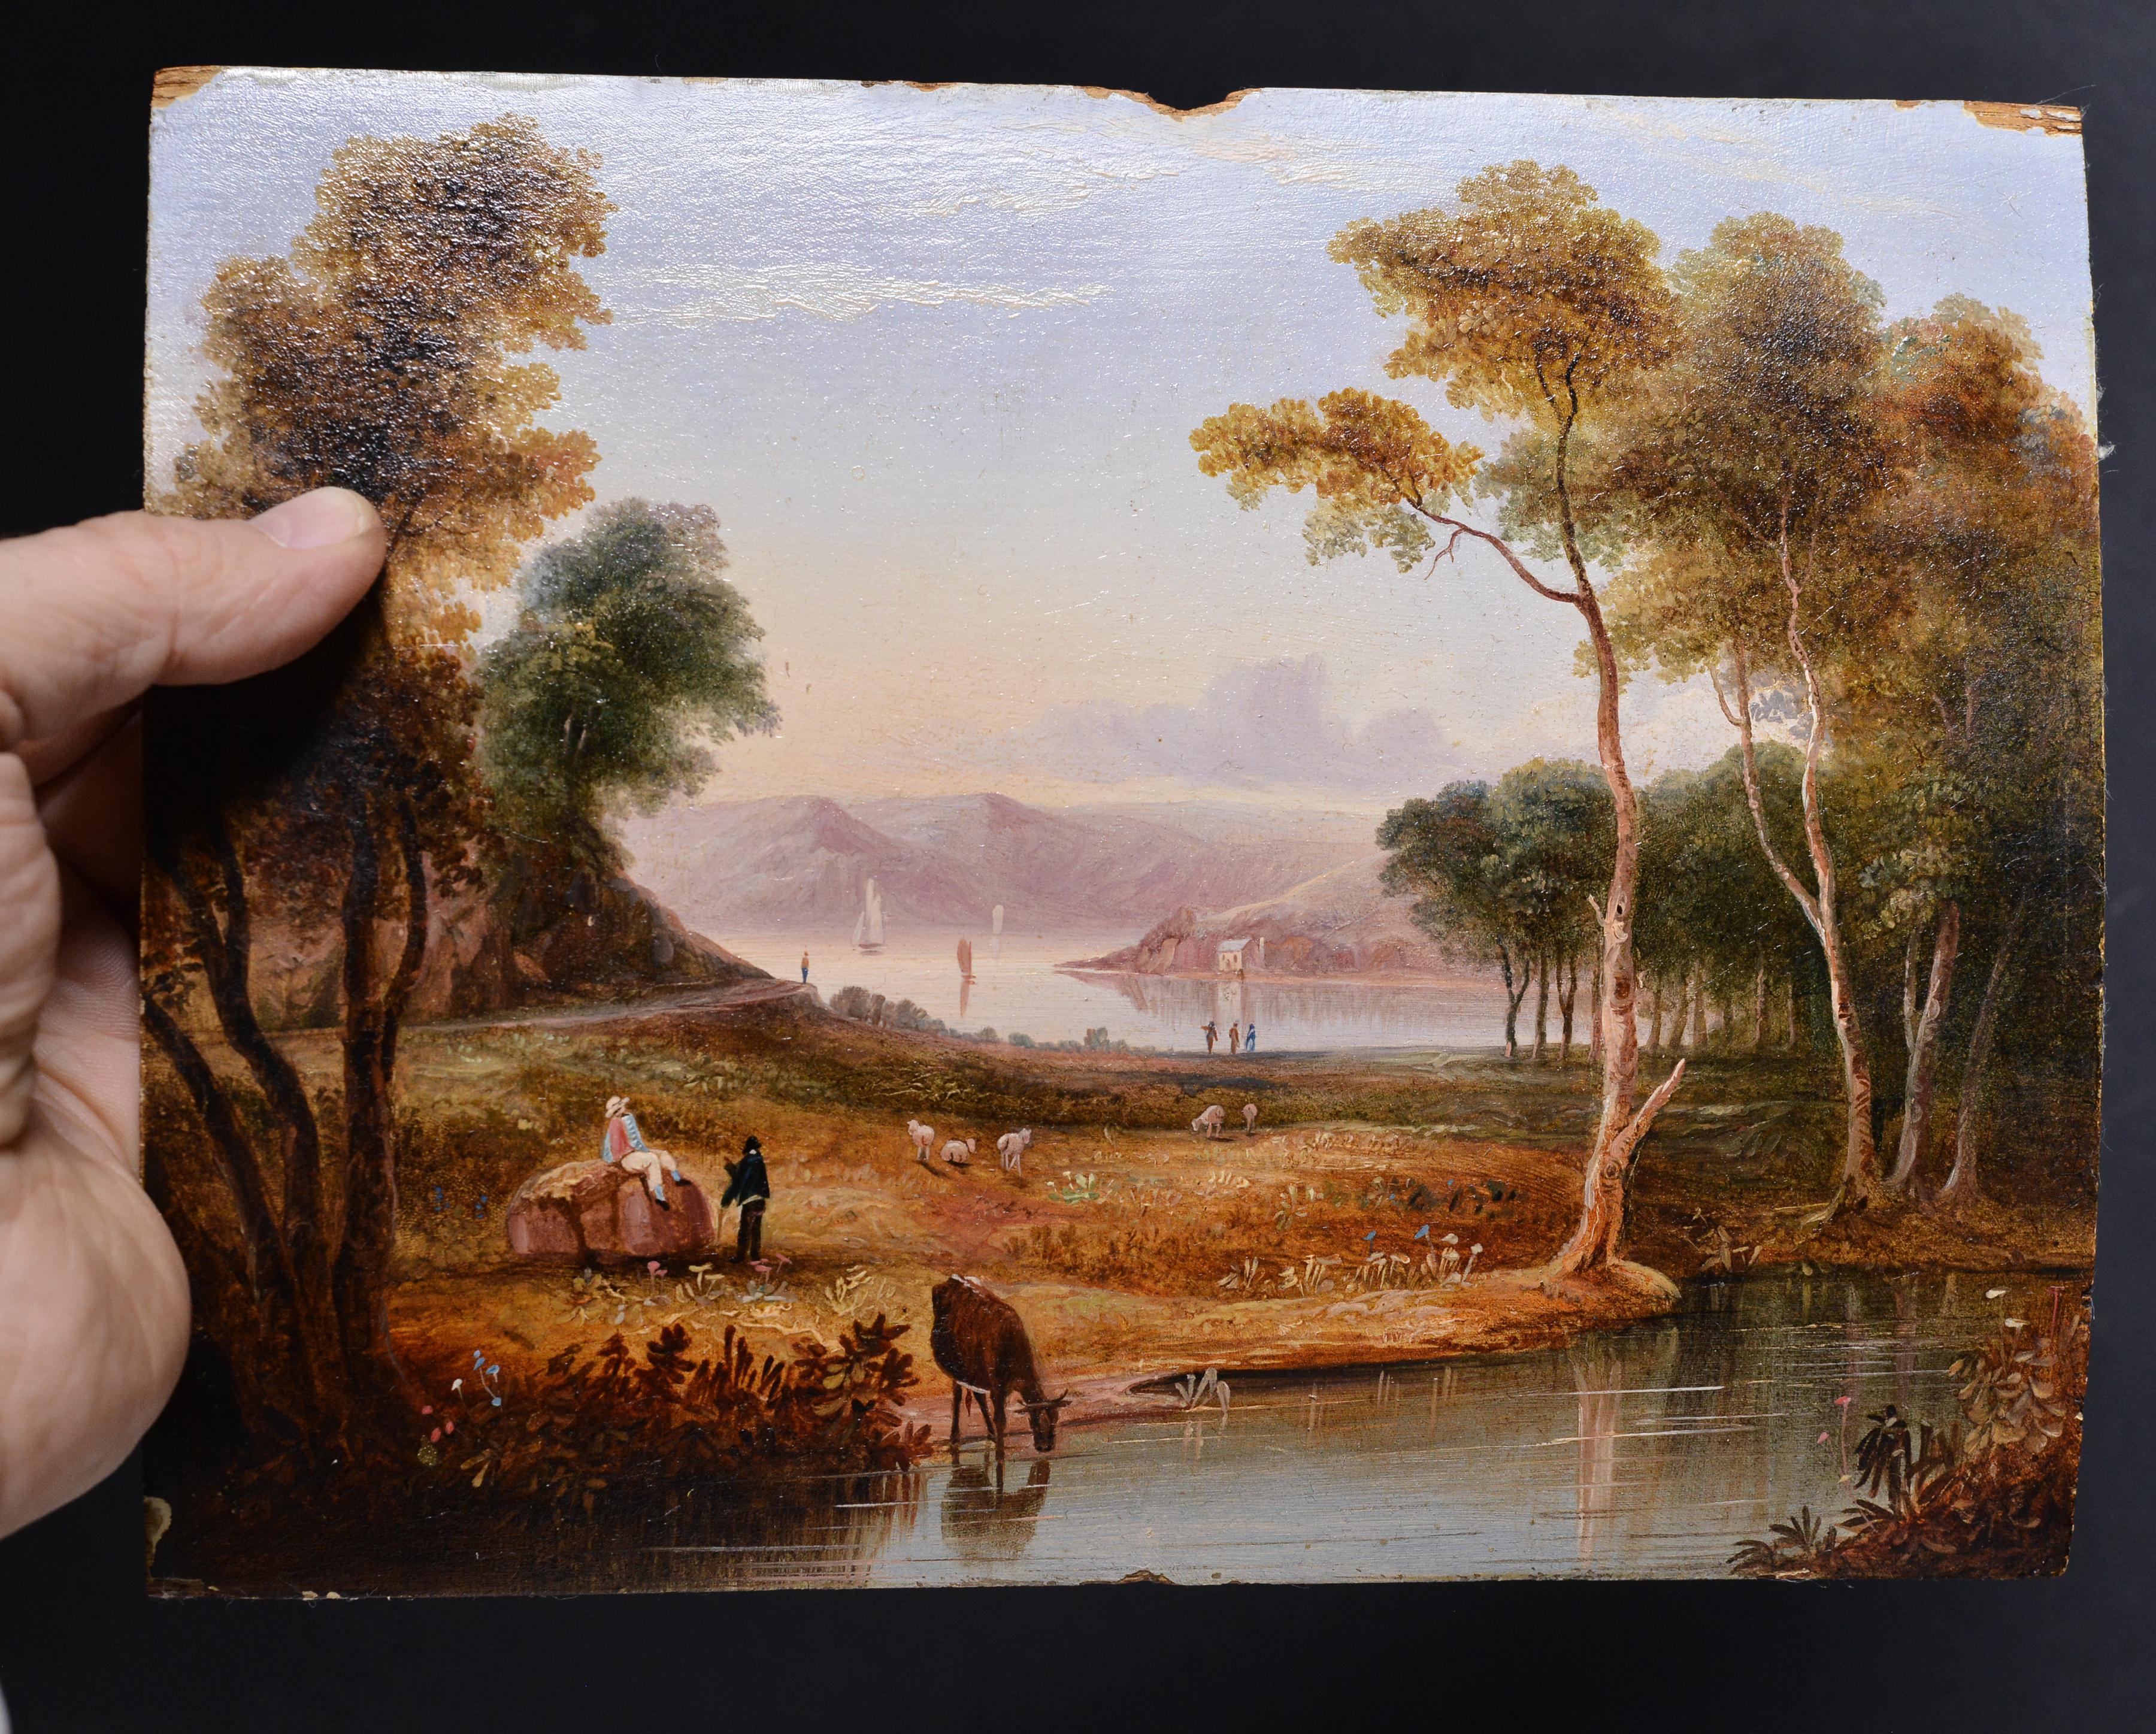 Pastoral Landscape with distant river valley in haze, flock, cattle watering and figures in lightly wooded foreground - Idyllic scene painted in oils by unknown professional mid-19th century artist in late Romanticism manner. The artist has created